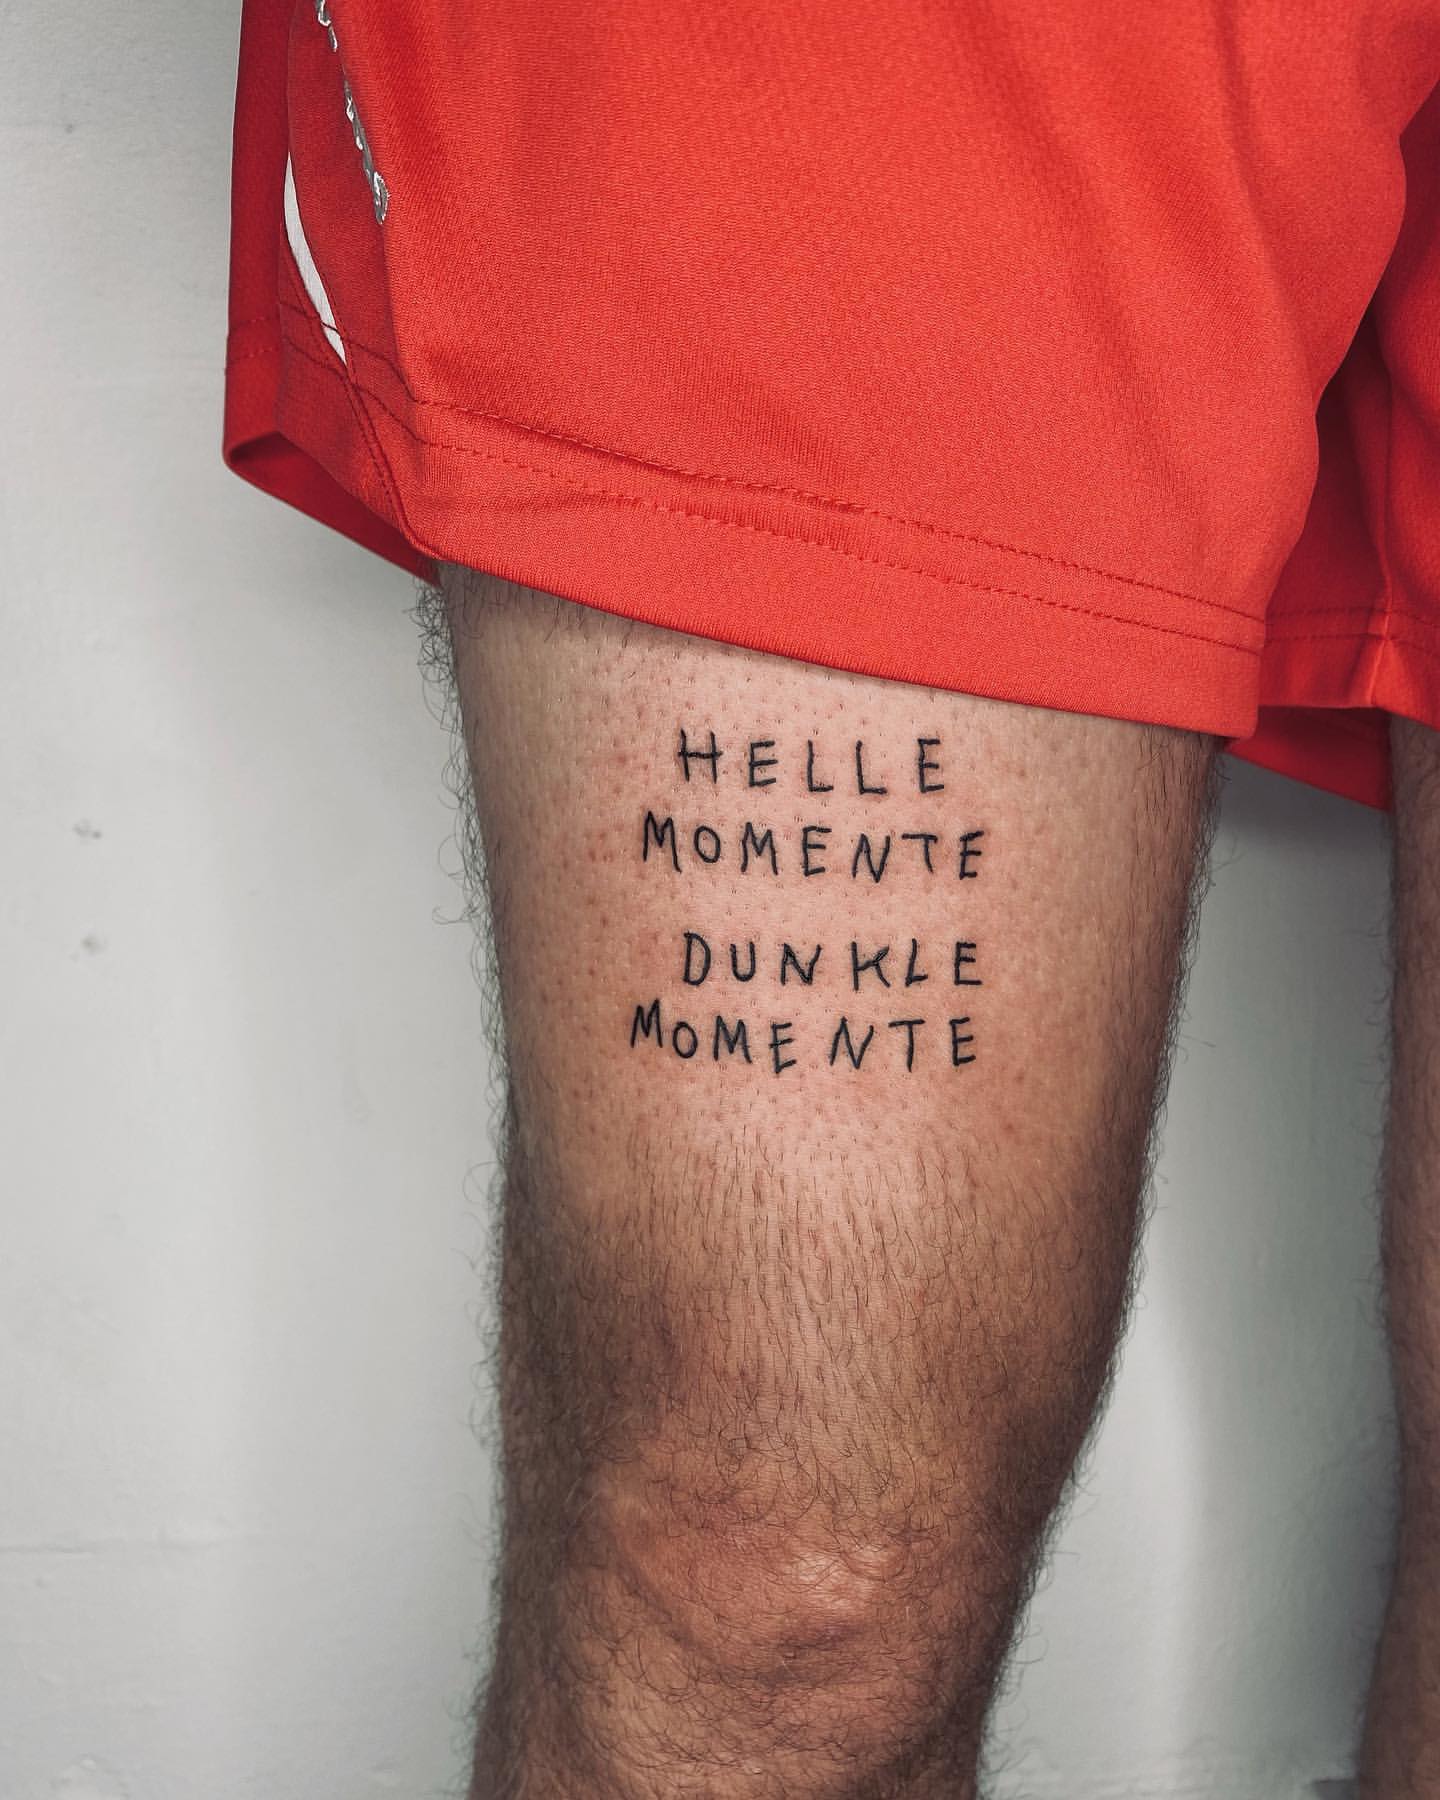 French Tattoos: 62 Sayings, Words, and Ideas